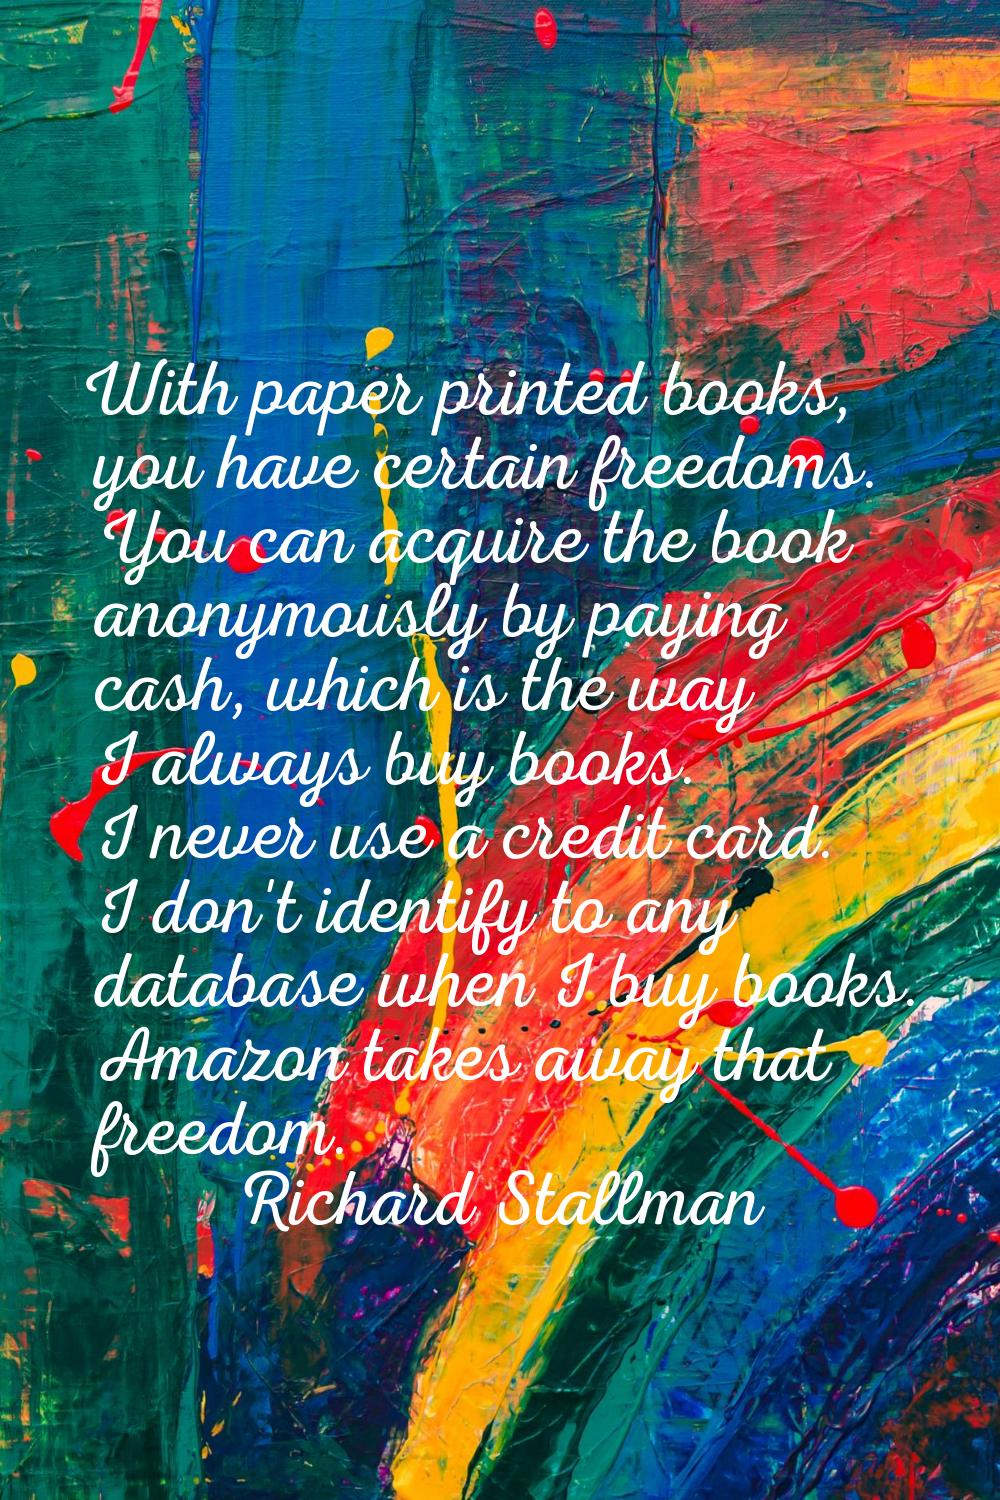 With paper printed books, you have certain freedoms. You can acquire the book anonymously by paying